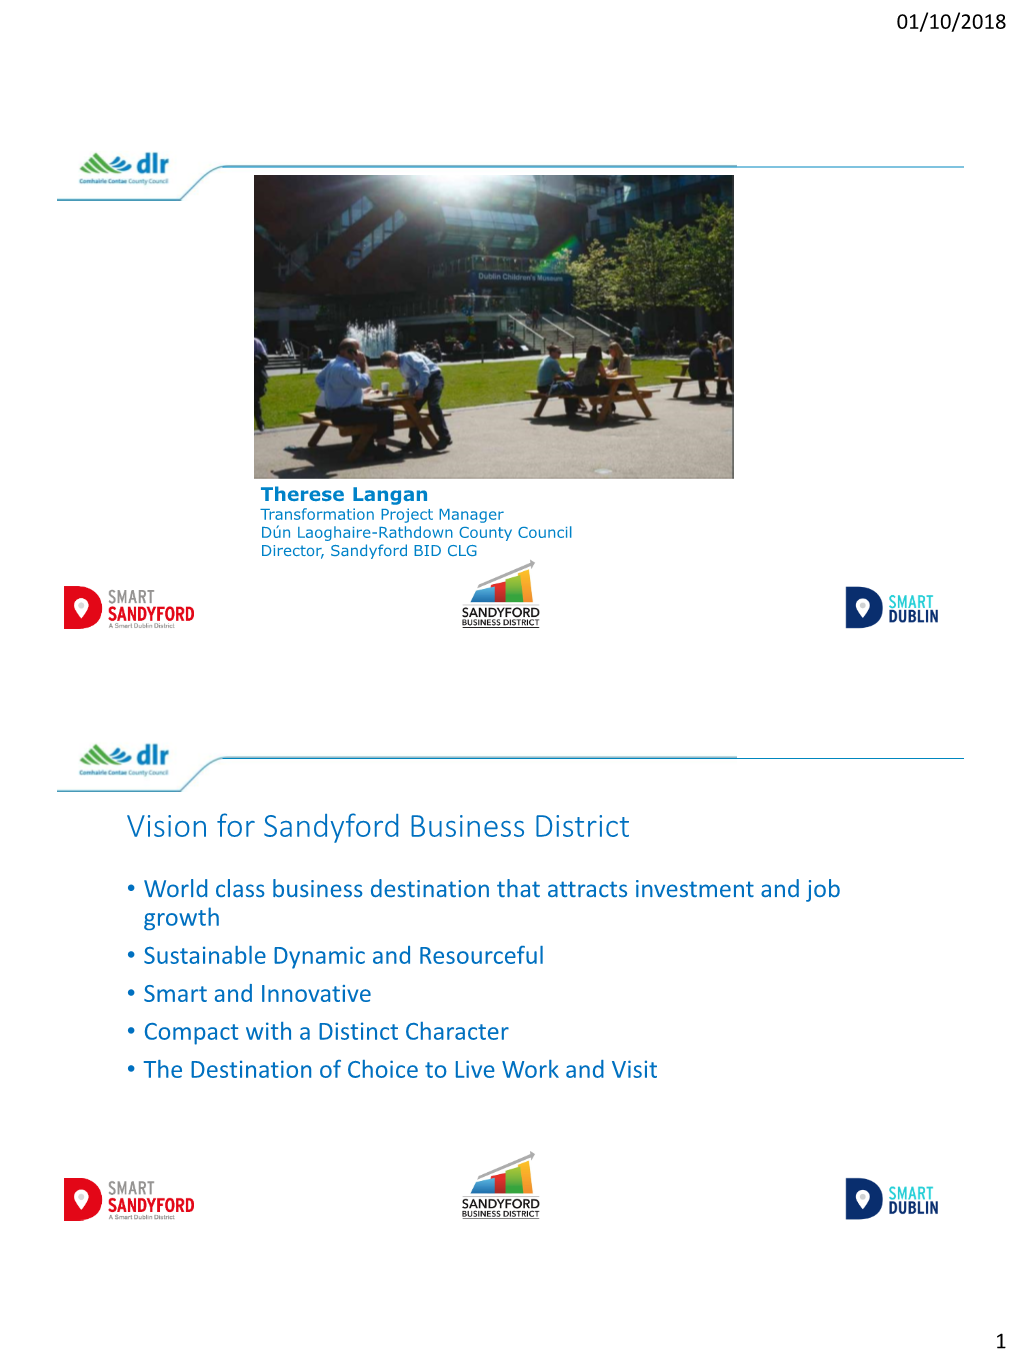 Vision for Sandyford Business District